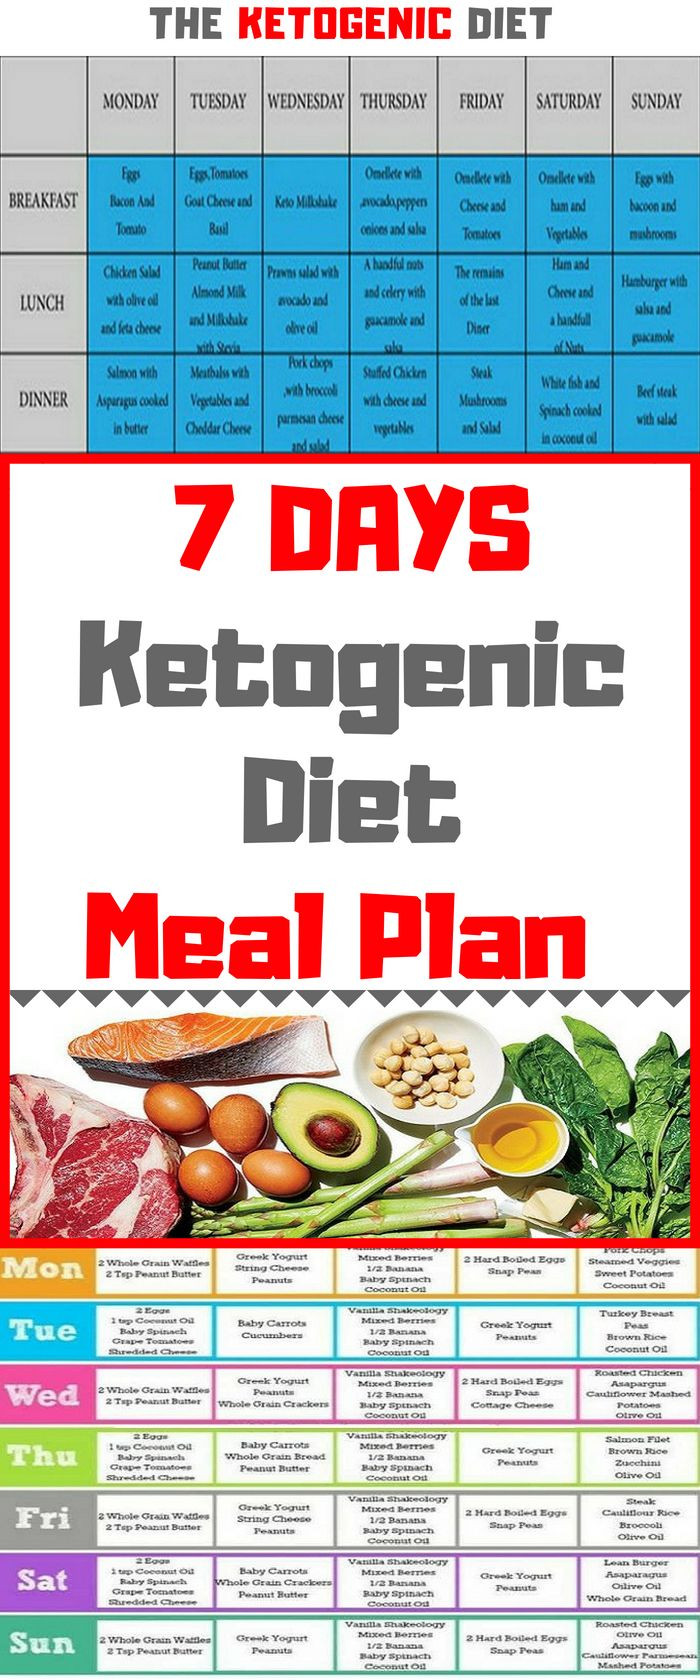 Strict Keto Diet Plan
 After all you will see that the t is not so strict and